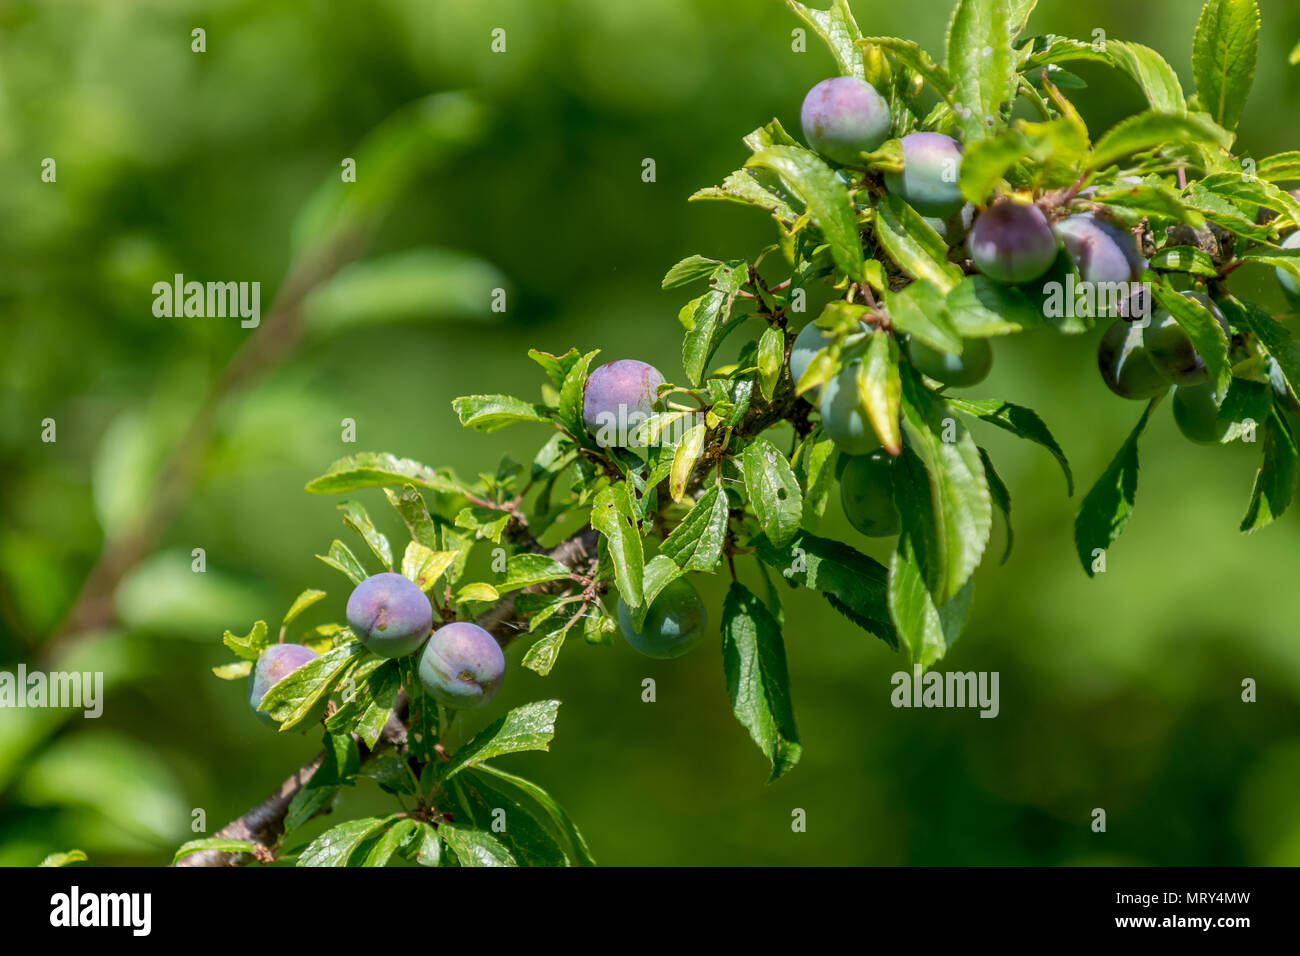 Branch of wild damson plum tree with dark purple fruits and bright green leaves in the sunshine. Stock Photo